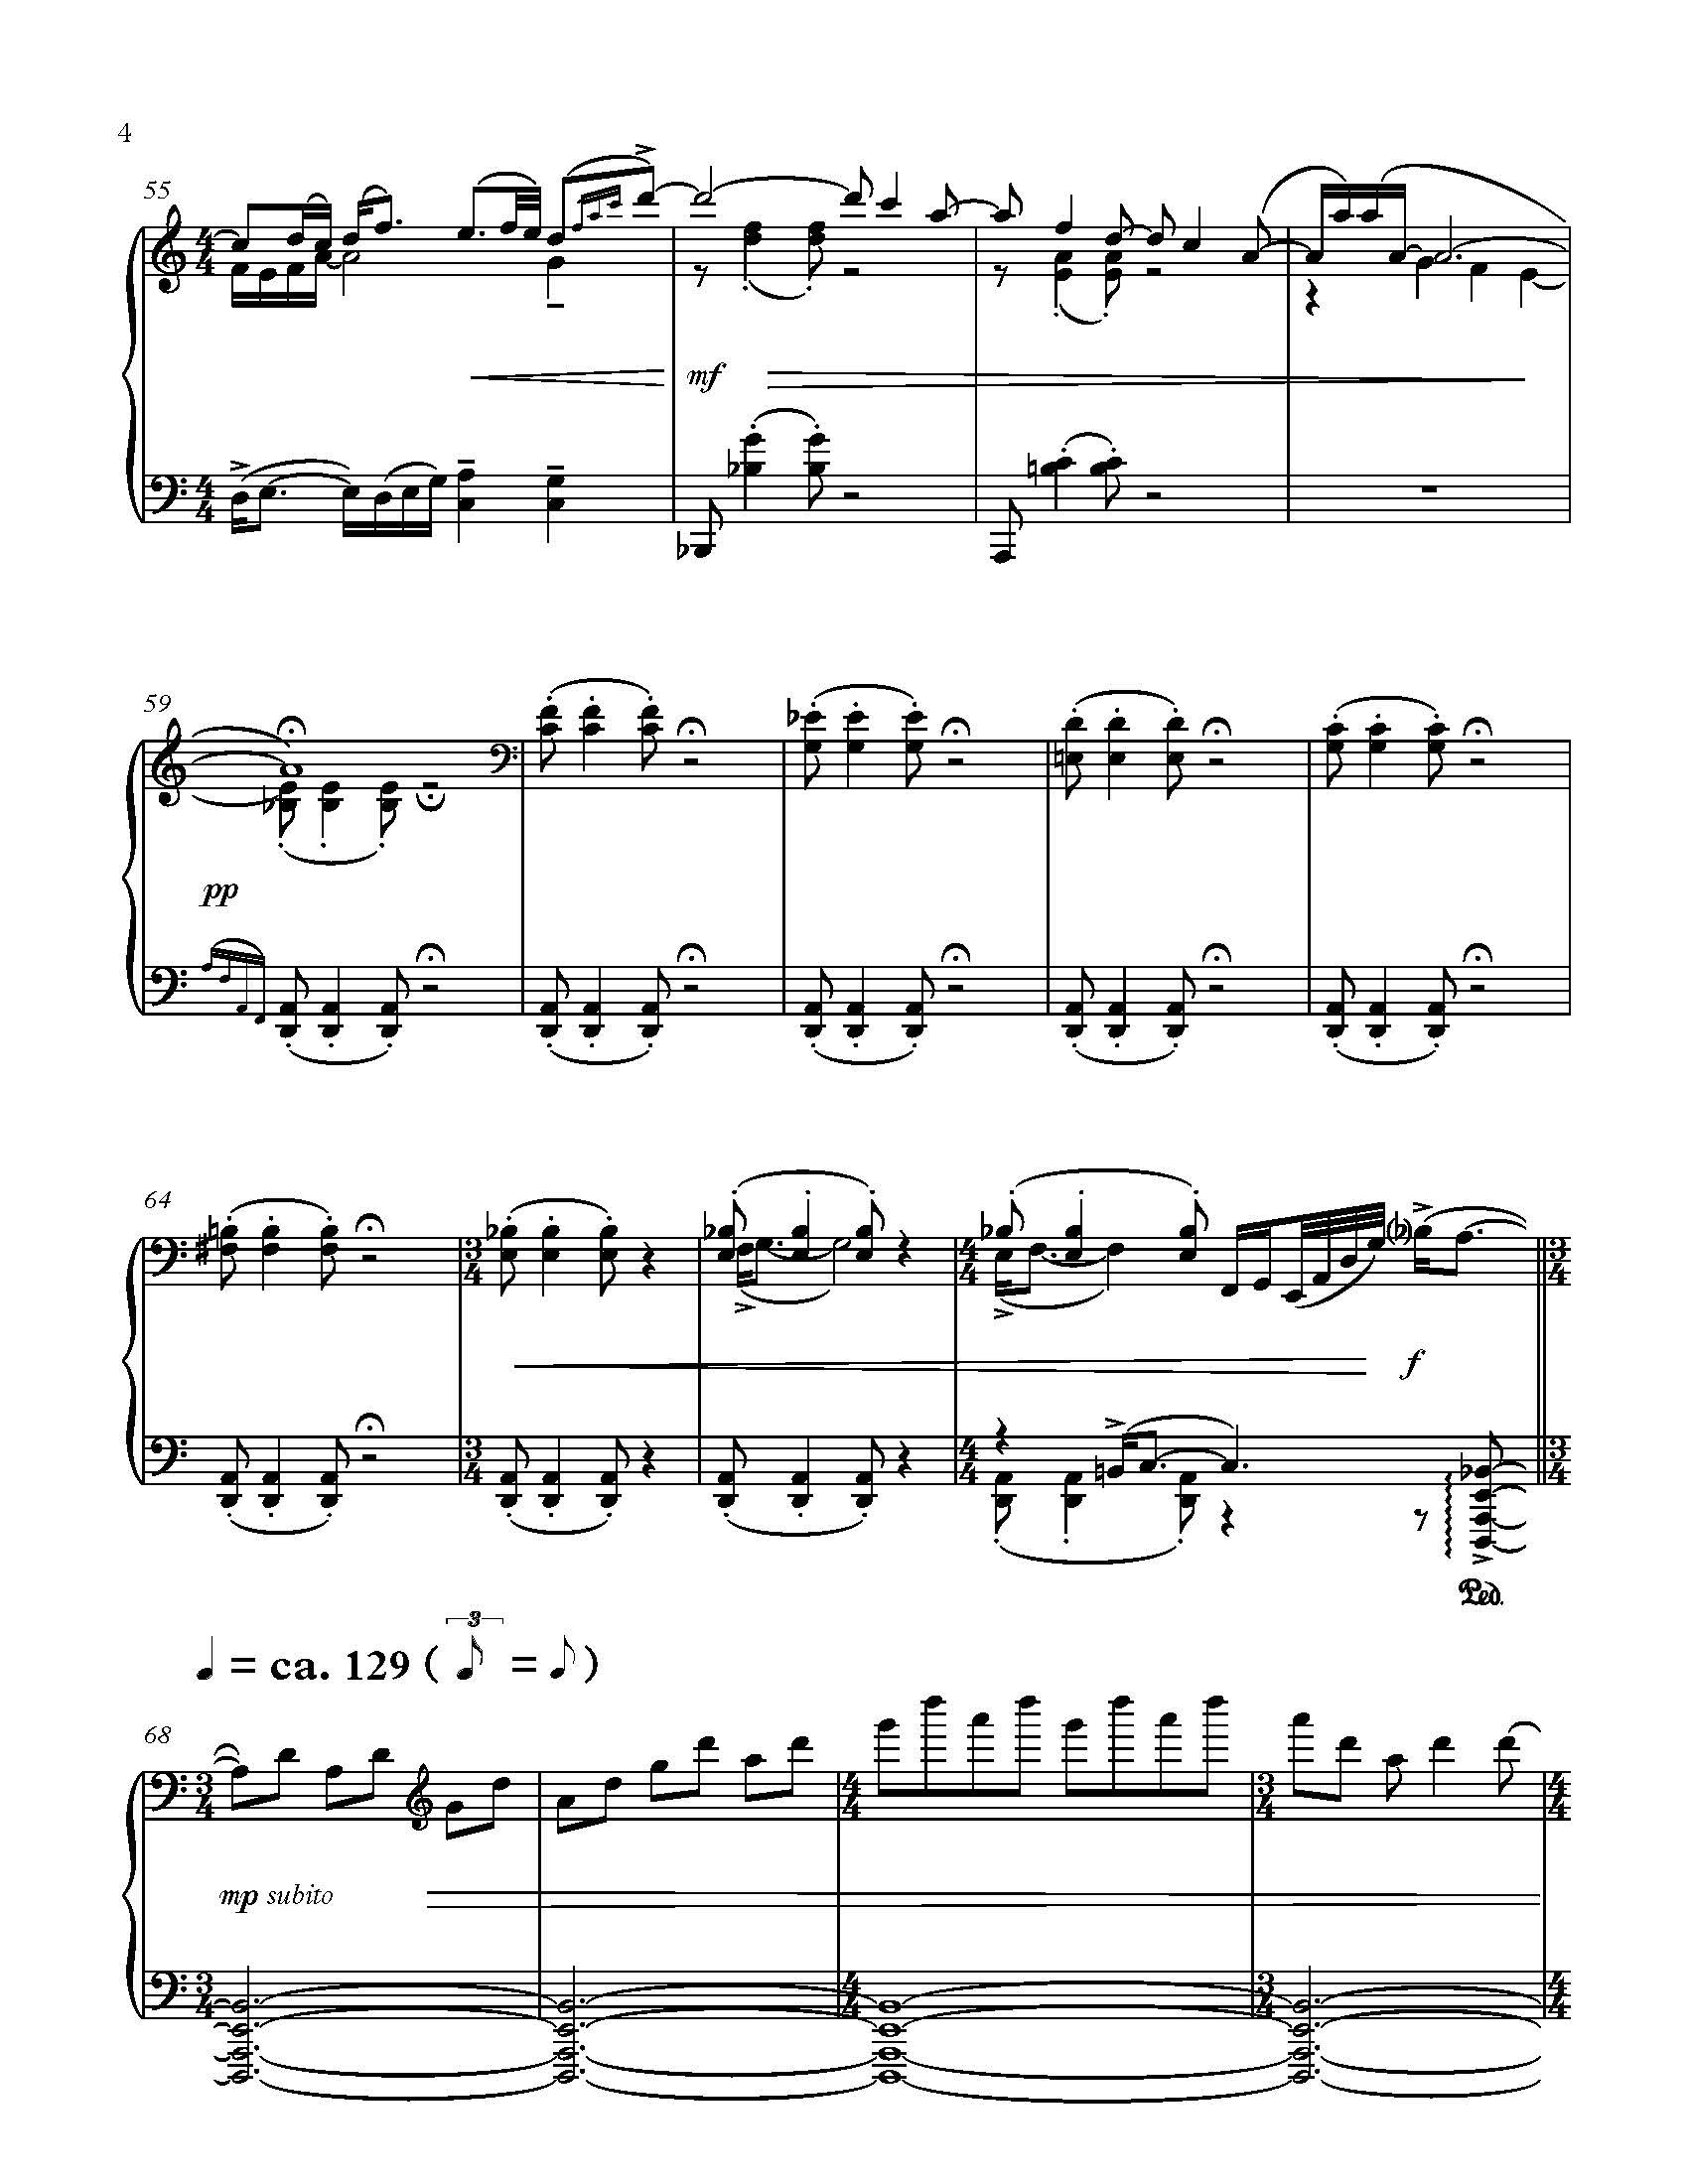 Perforation - Complete Score_Page_10.jpg